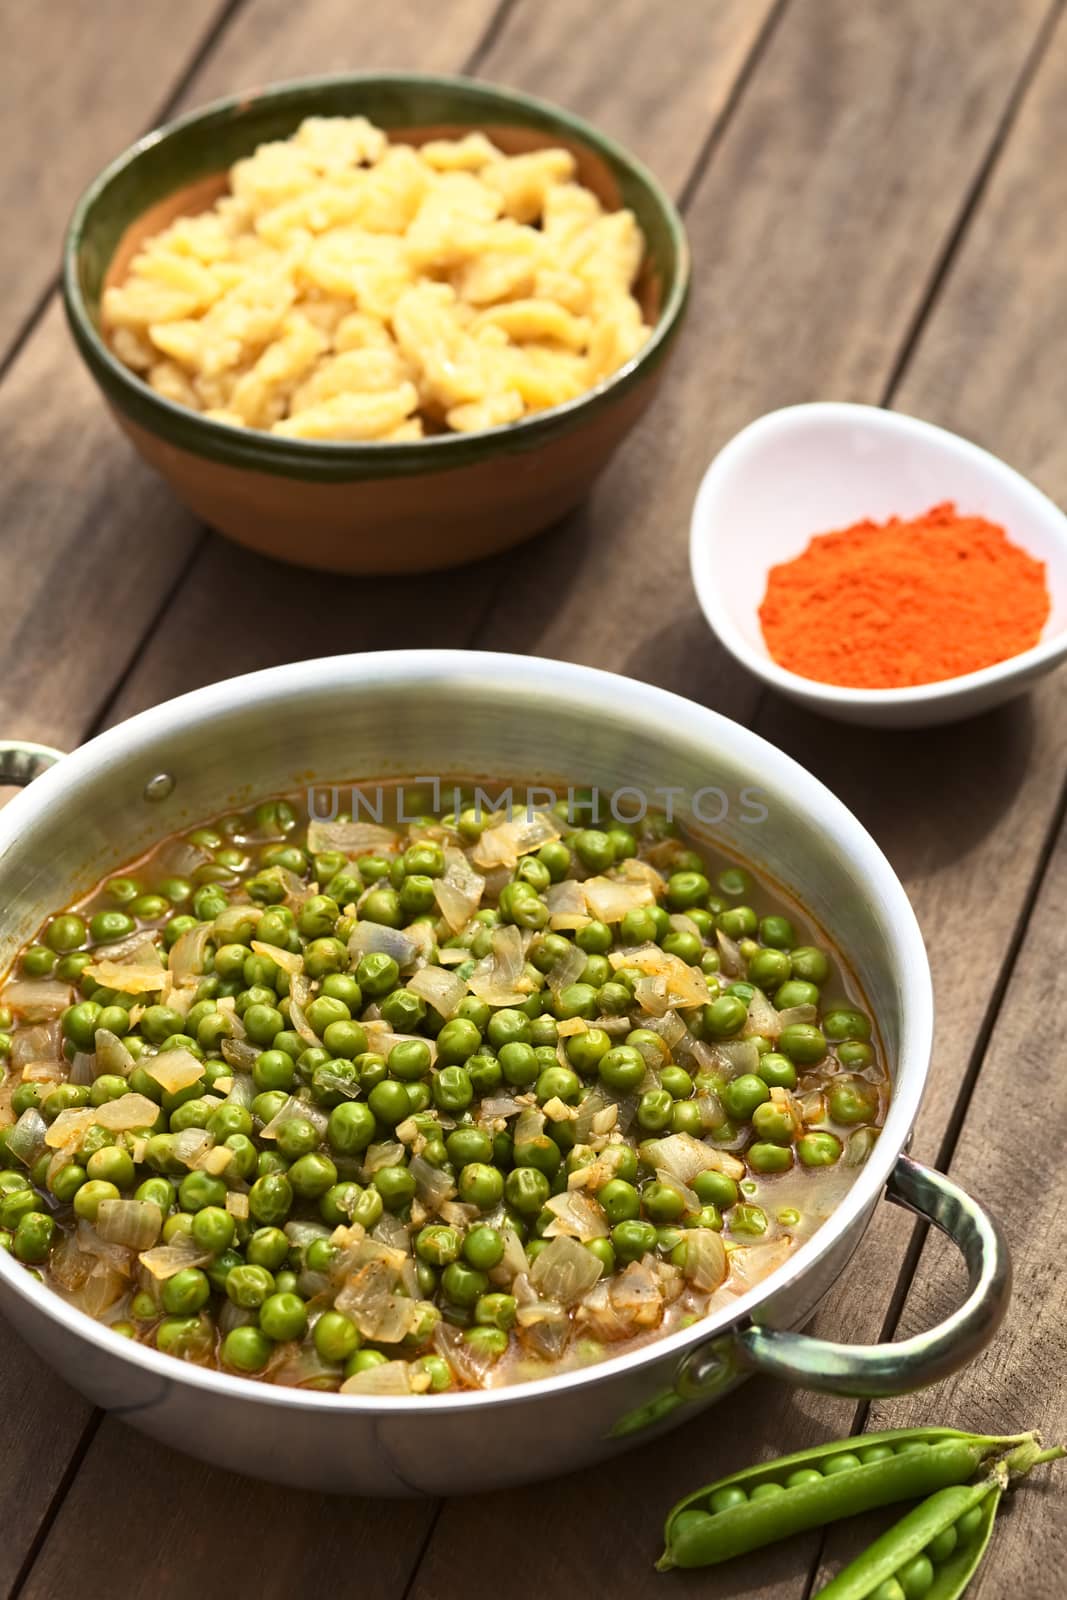 Hungarian pea stew made of onion and peas and seasoned with paprika and salt, served usually with Hungarian galuska or nokedli (homemade noodles) (Selective Focus, Focus into the middle of the stew)